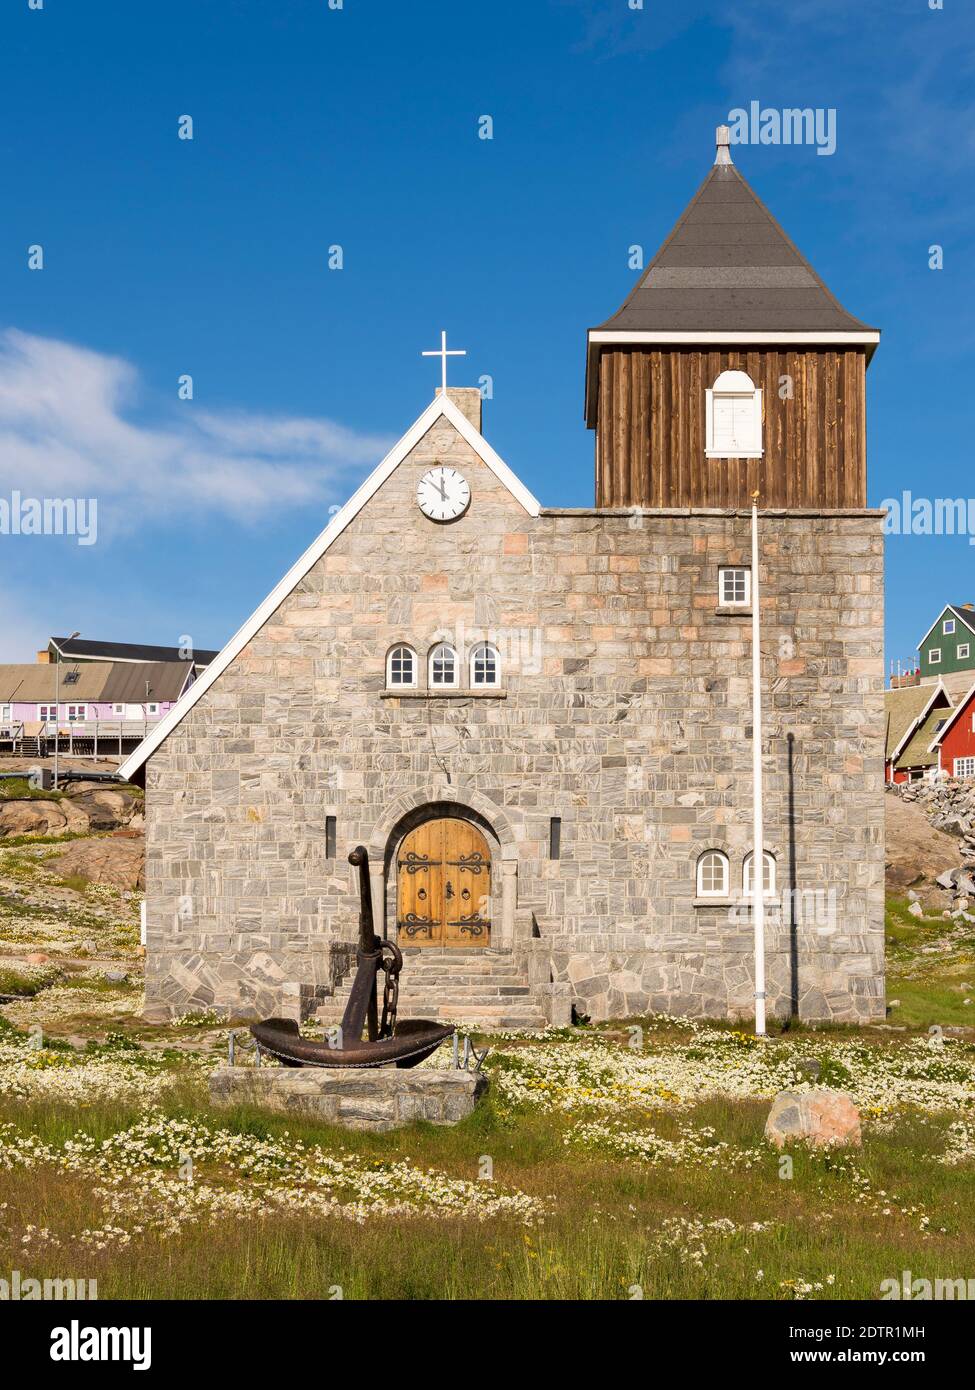 The church. The town Uummannaq in the north of West Greenland, located on an island  in the Uummannaq Fjord System. America, North America, Greenland Stock Photo